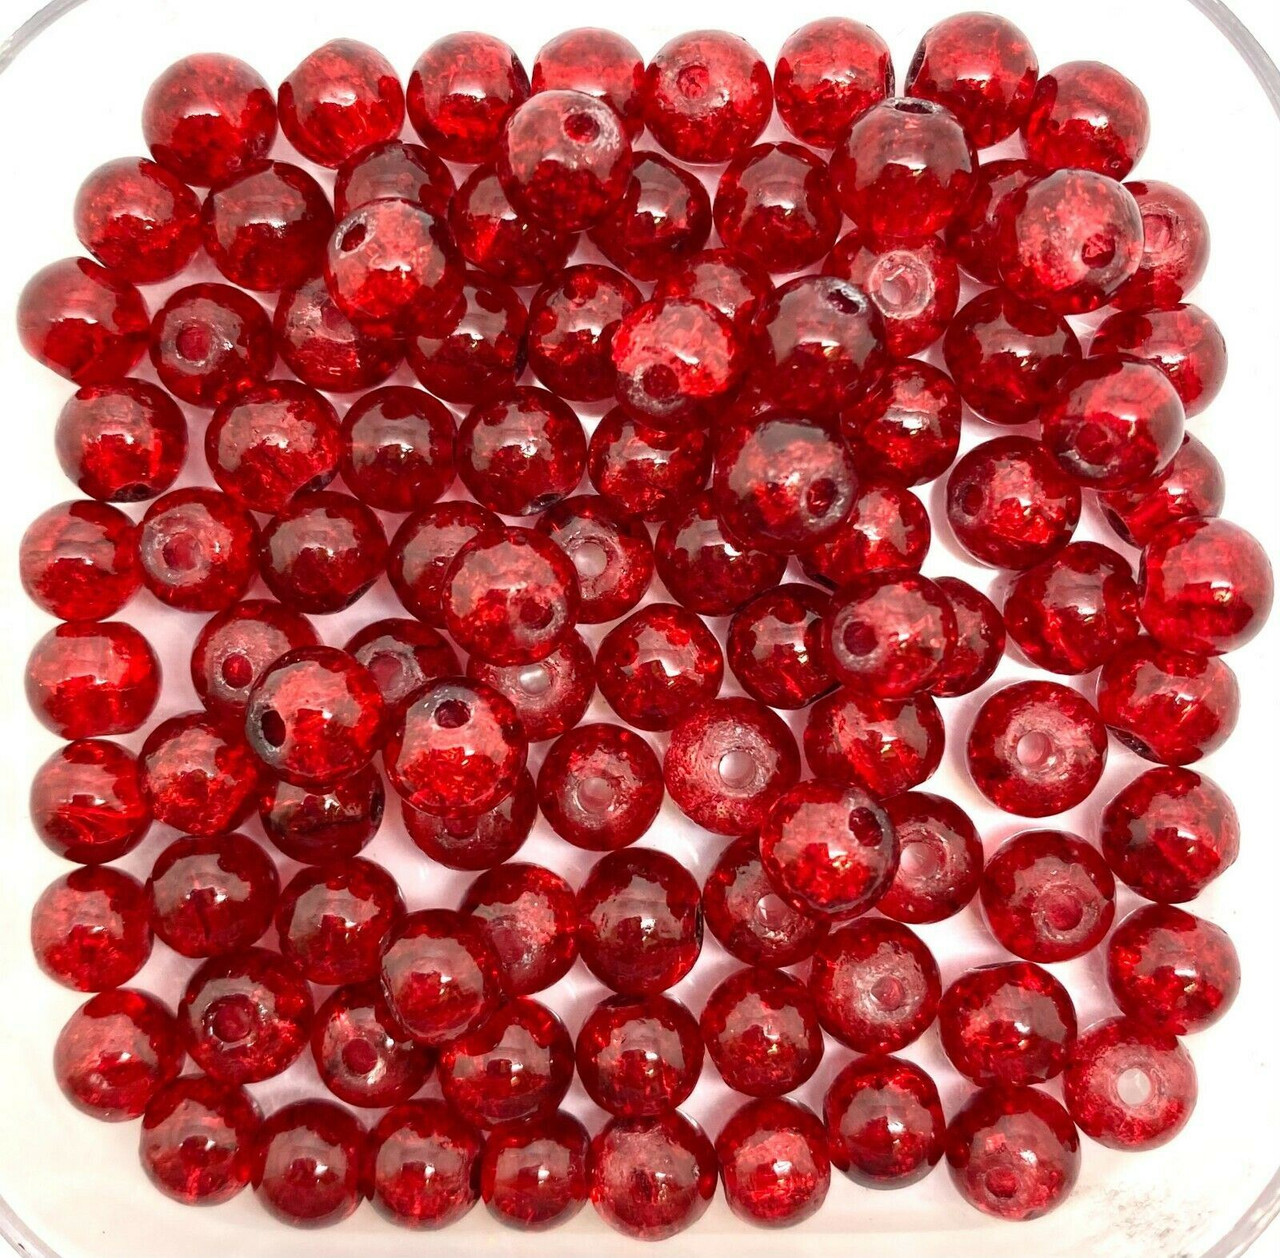 6mm Crackle Glass Beads - Dark Red, 100 beads